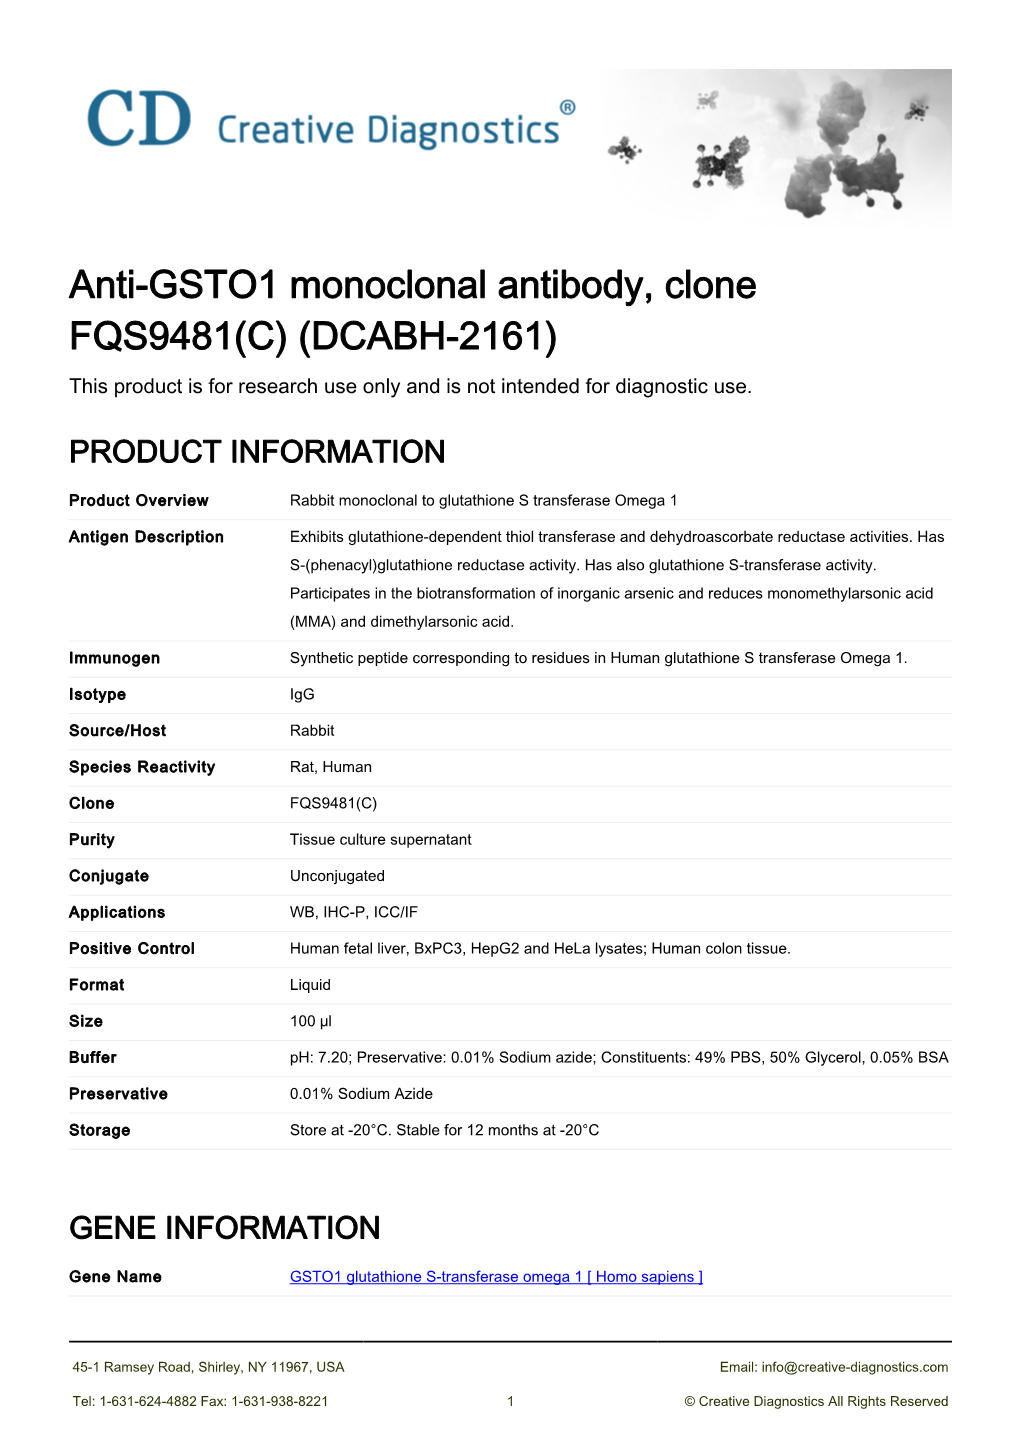 Anti-GSTO1 Monoclonal Antibody, Clone FQS9481(C) (DCABH-2161) This Product Is for Research Use Only and Is Not Intended for Diagnostic Use